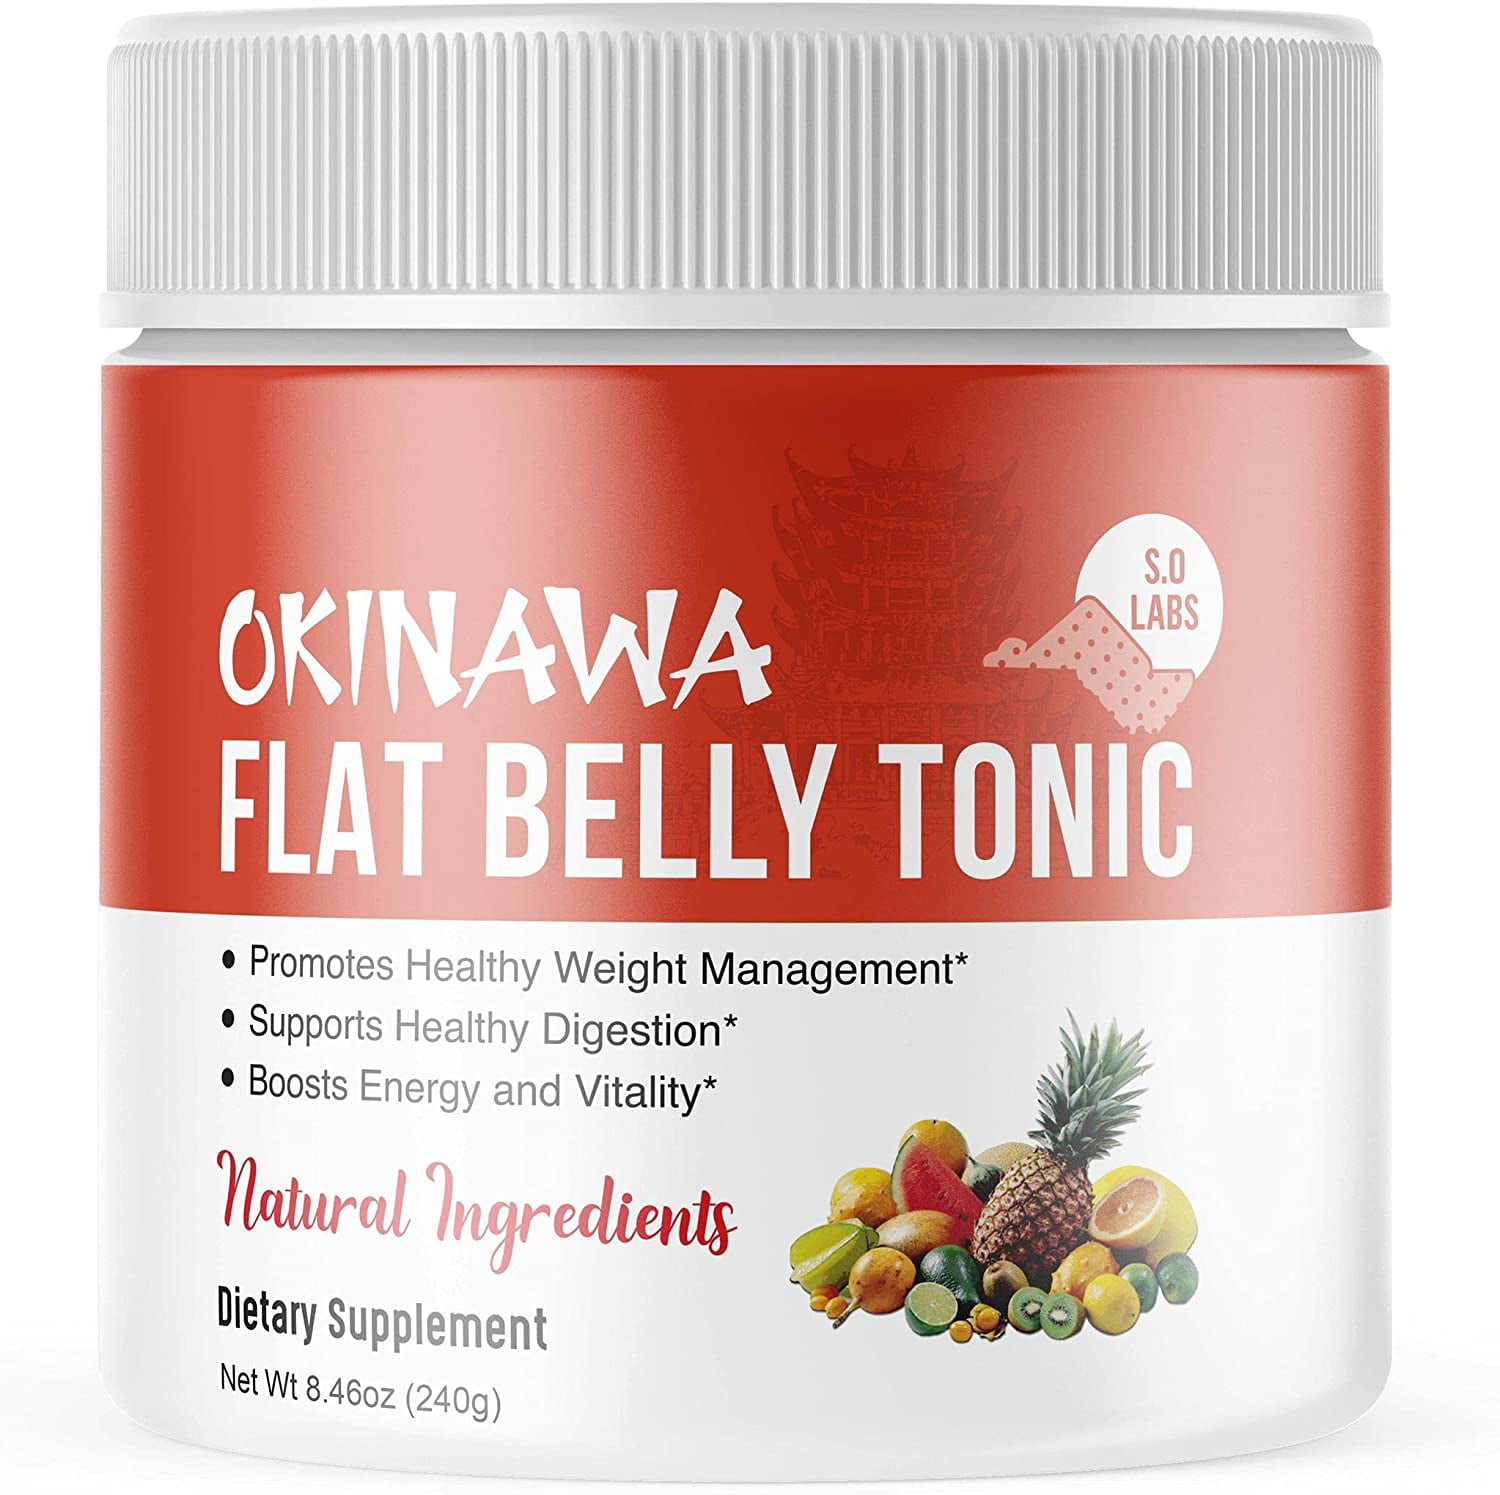 Okinawa Flat Belly Tonic Reviews - Weight Loss Powder Drink Mix & Japanese Tonic Melts Fat Its's Scam Or Legit? Discover Magazine